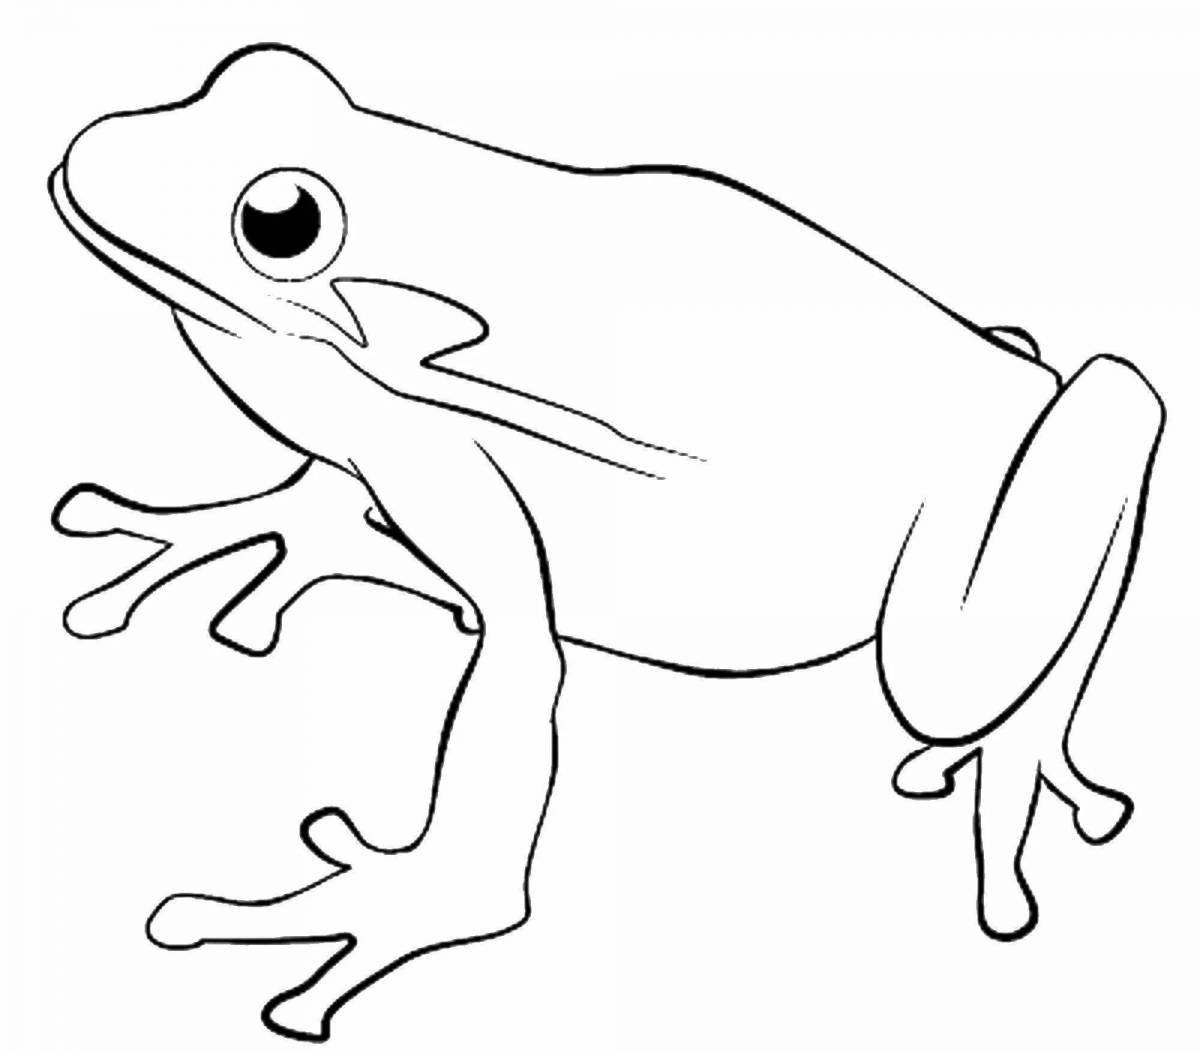 Amazing frog coloring book for kids